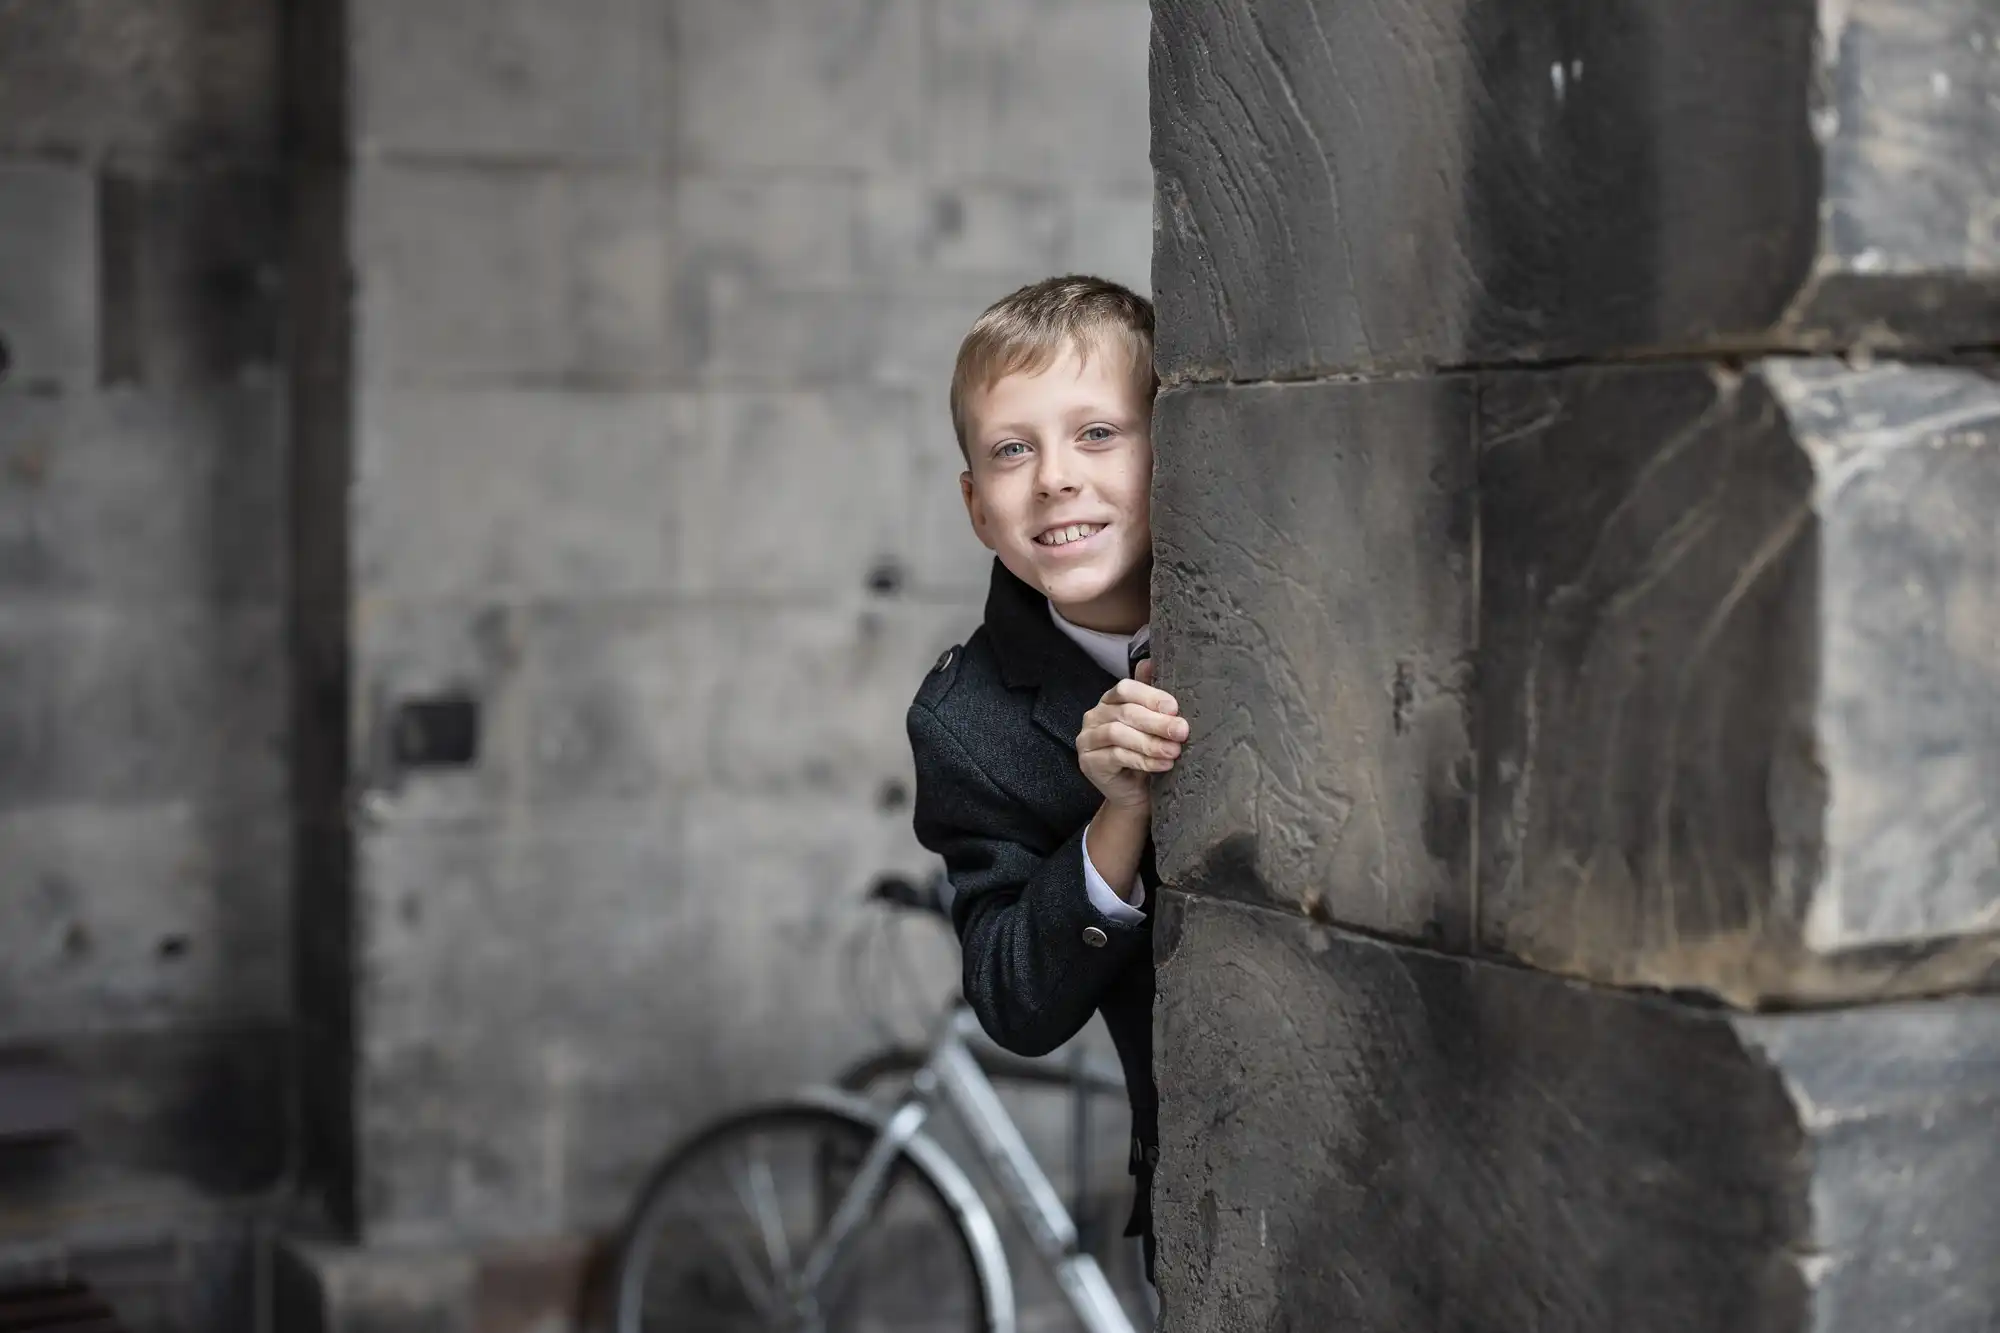 A boy in a gray coat smiles as he peeks around a stone column. A bicycle is partially visible in the background.